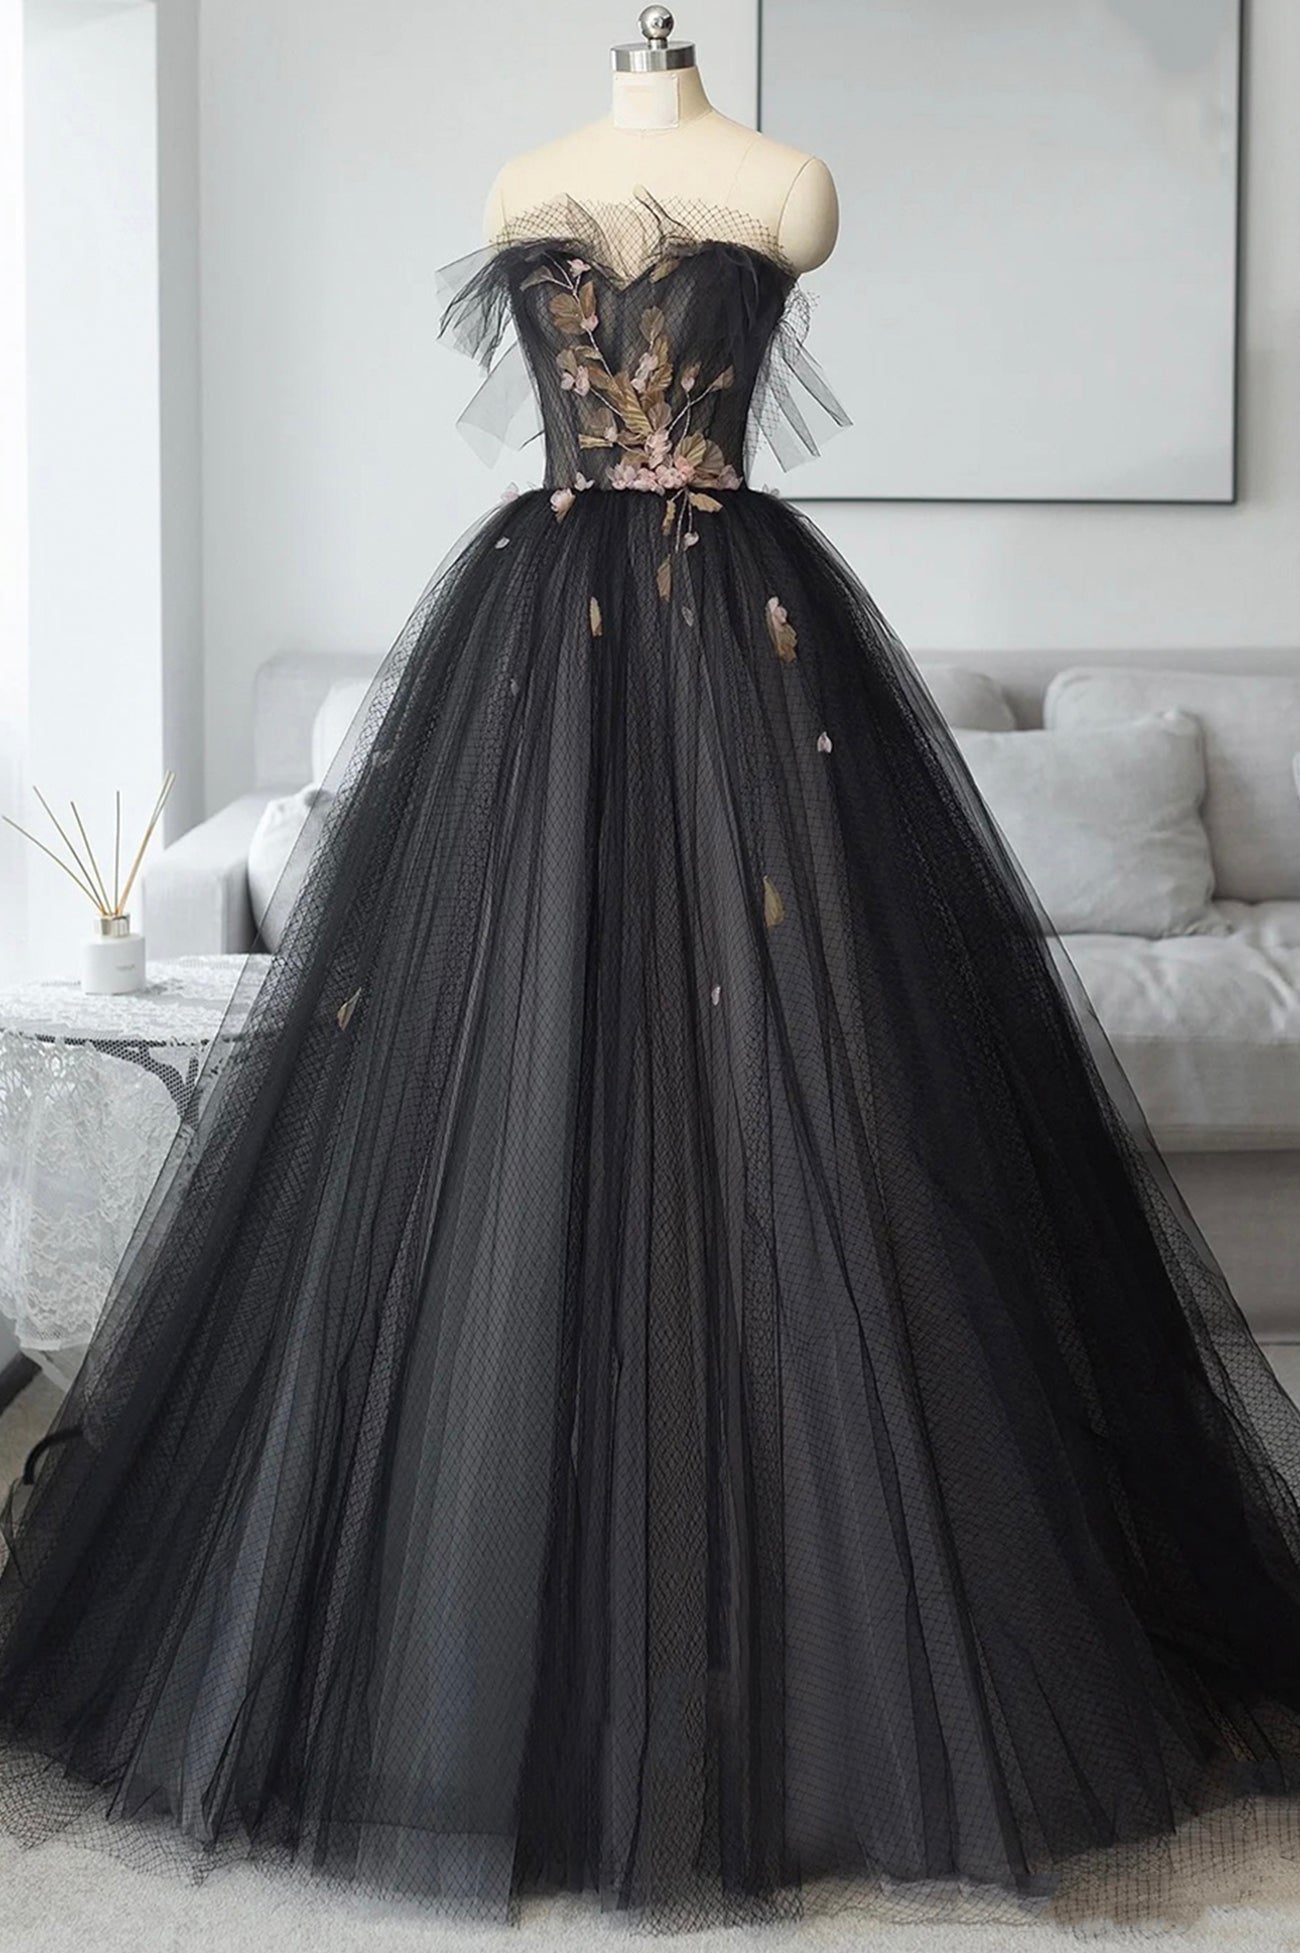 Black Tulle Long Corset Prom Dress, Black A-Line Strapless Evening Dress outfit, Homecoming Dresses Style